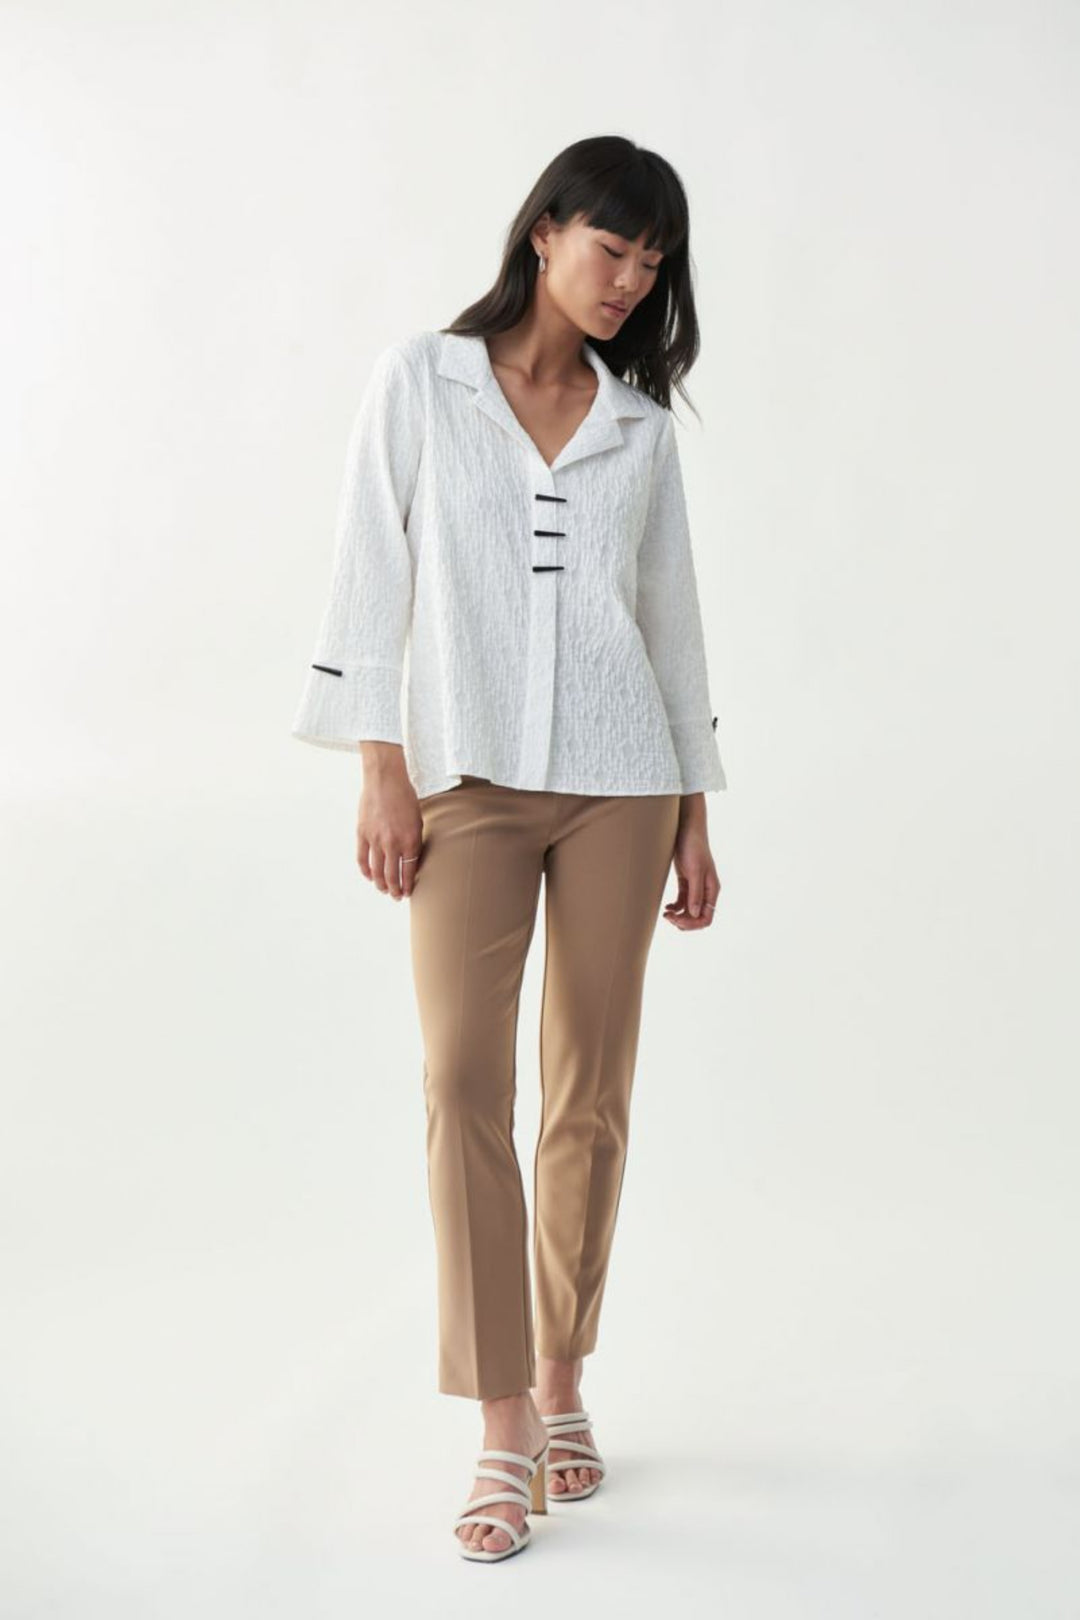 Joseph Ribkoff Fall 2024 The Willow Aankle Pant boasts a sleek and slim design, perfect for pairing with blouses and loose tops.